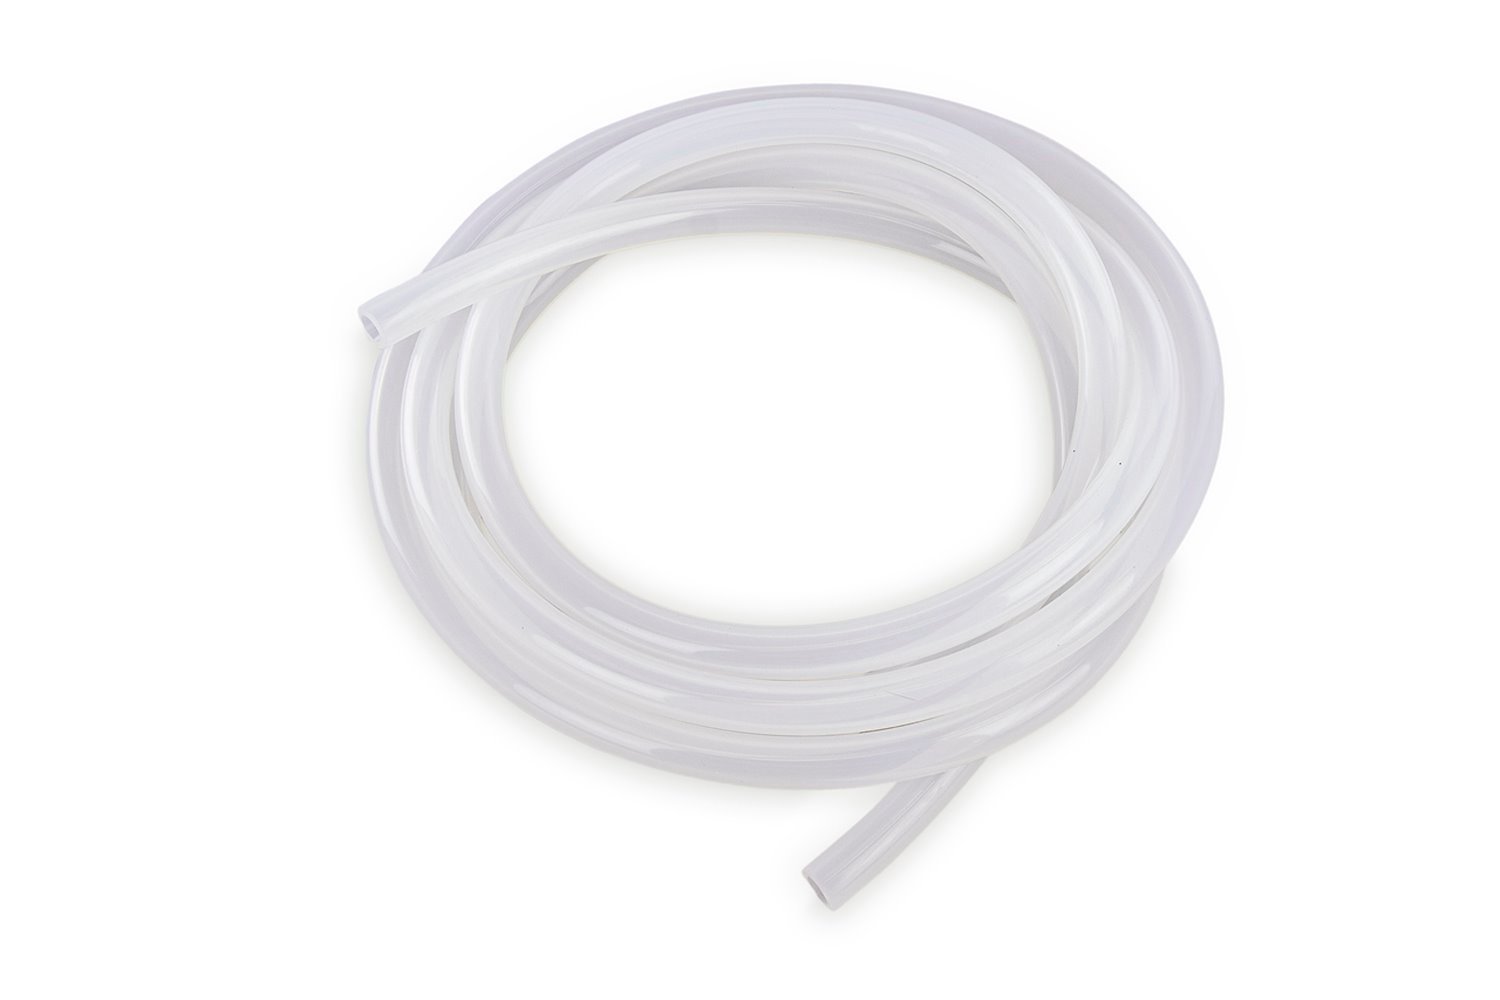 HTSVH35-CLEARx10 High-Temperature Silicone Vacuum Hose Tubing, 3.5 mm ID, 10 ft. Roll, Clear